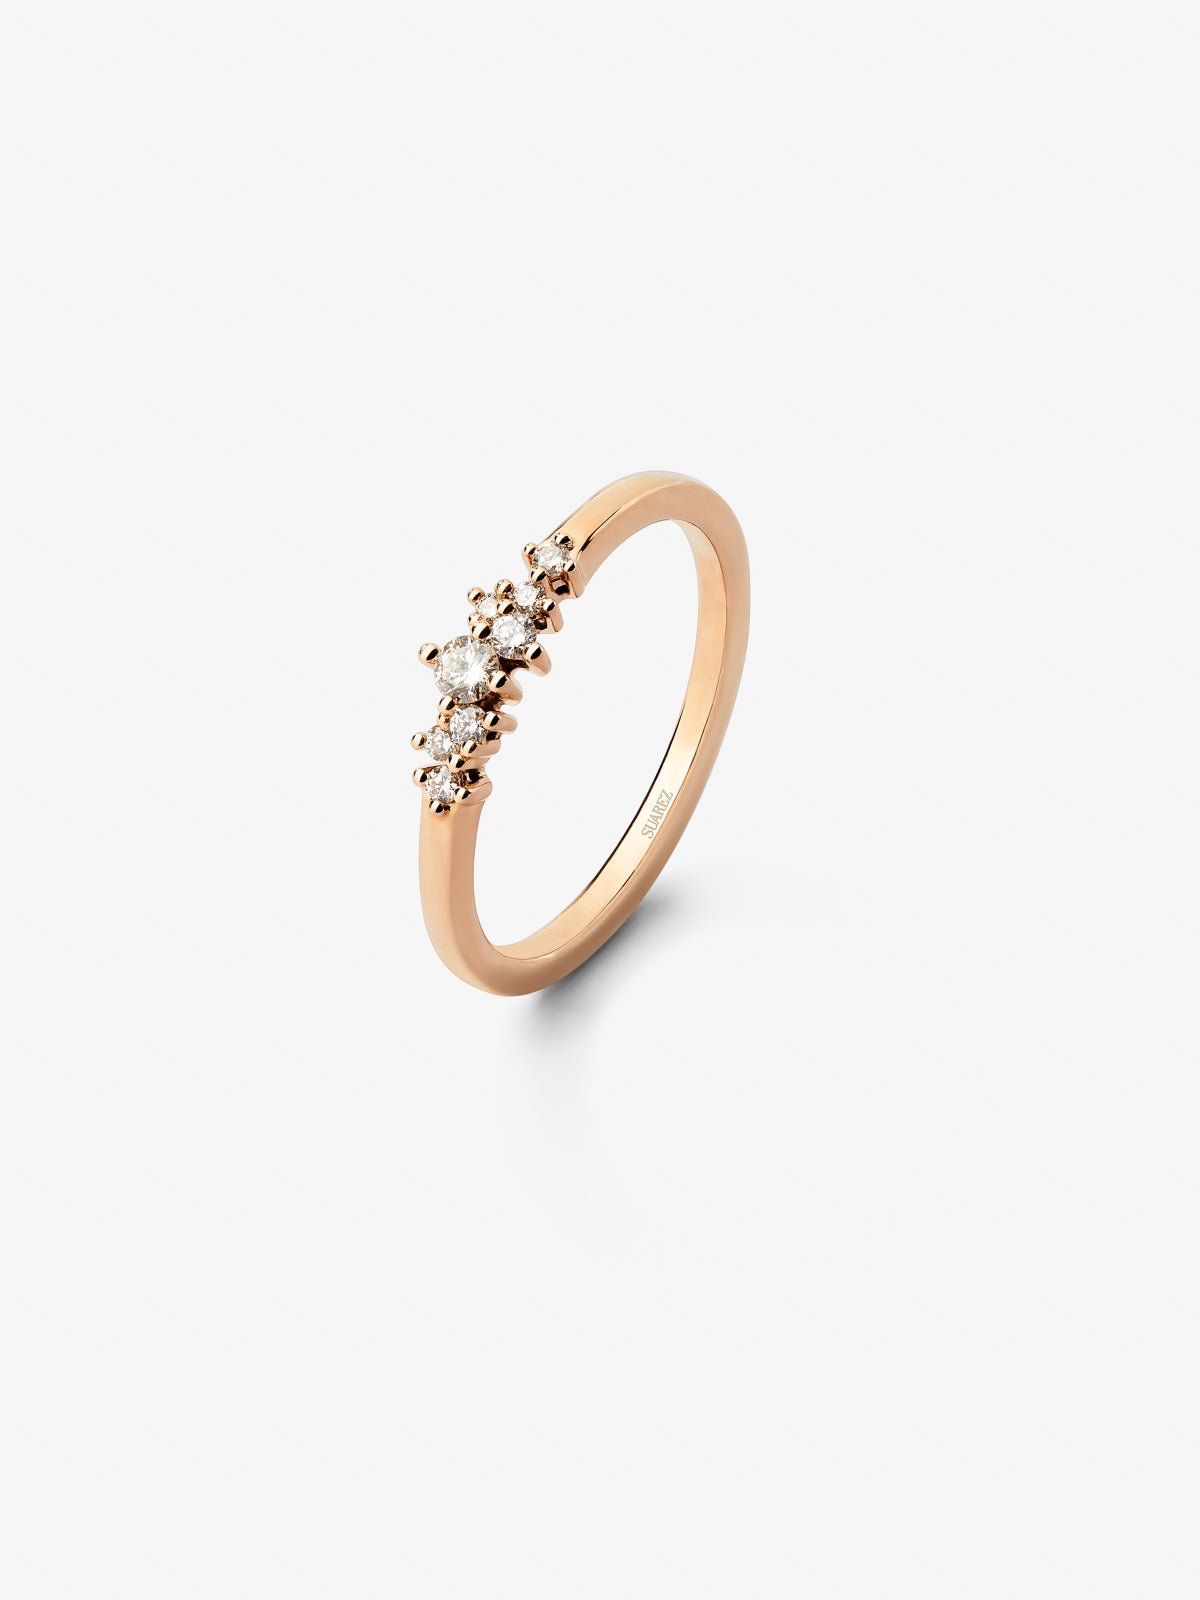 18K rose gold ring with 8 brilliant-cut diamonds with a total of 0.1 cts